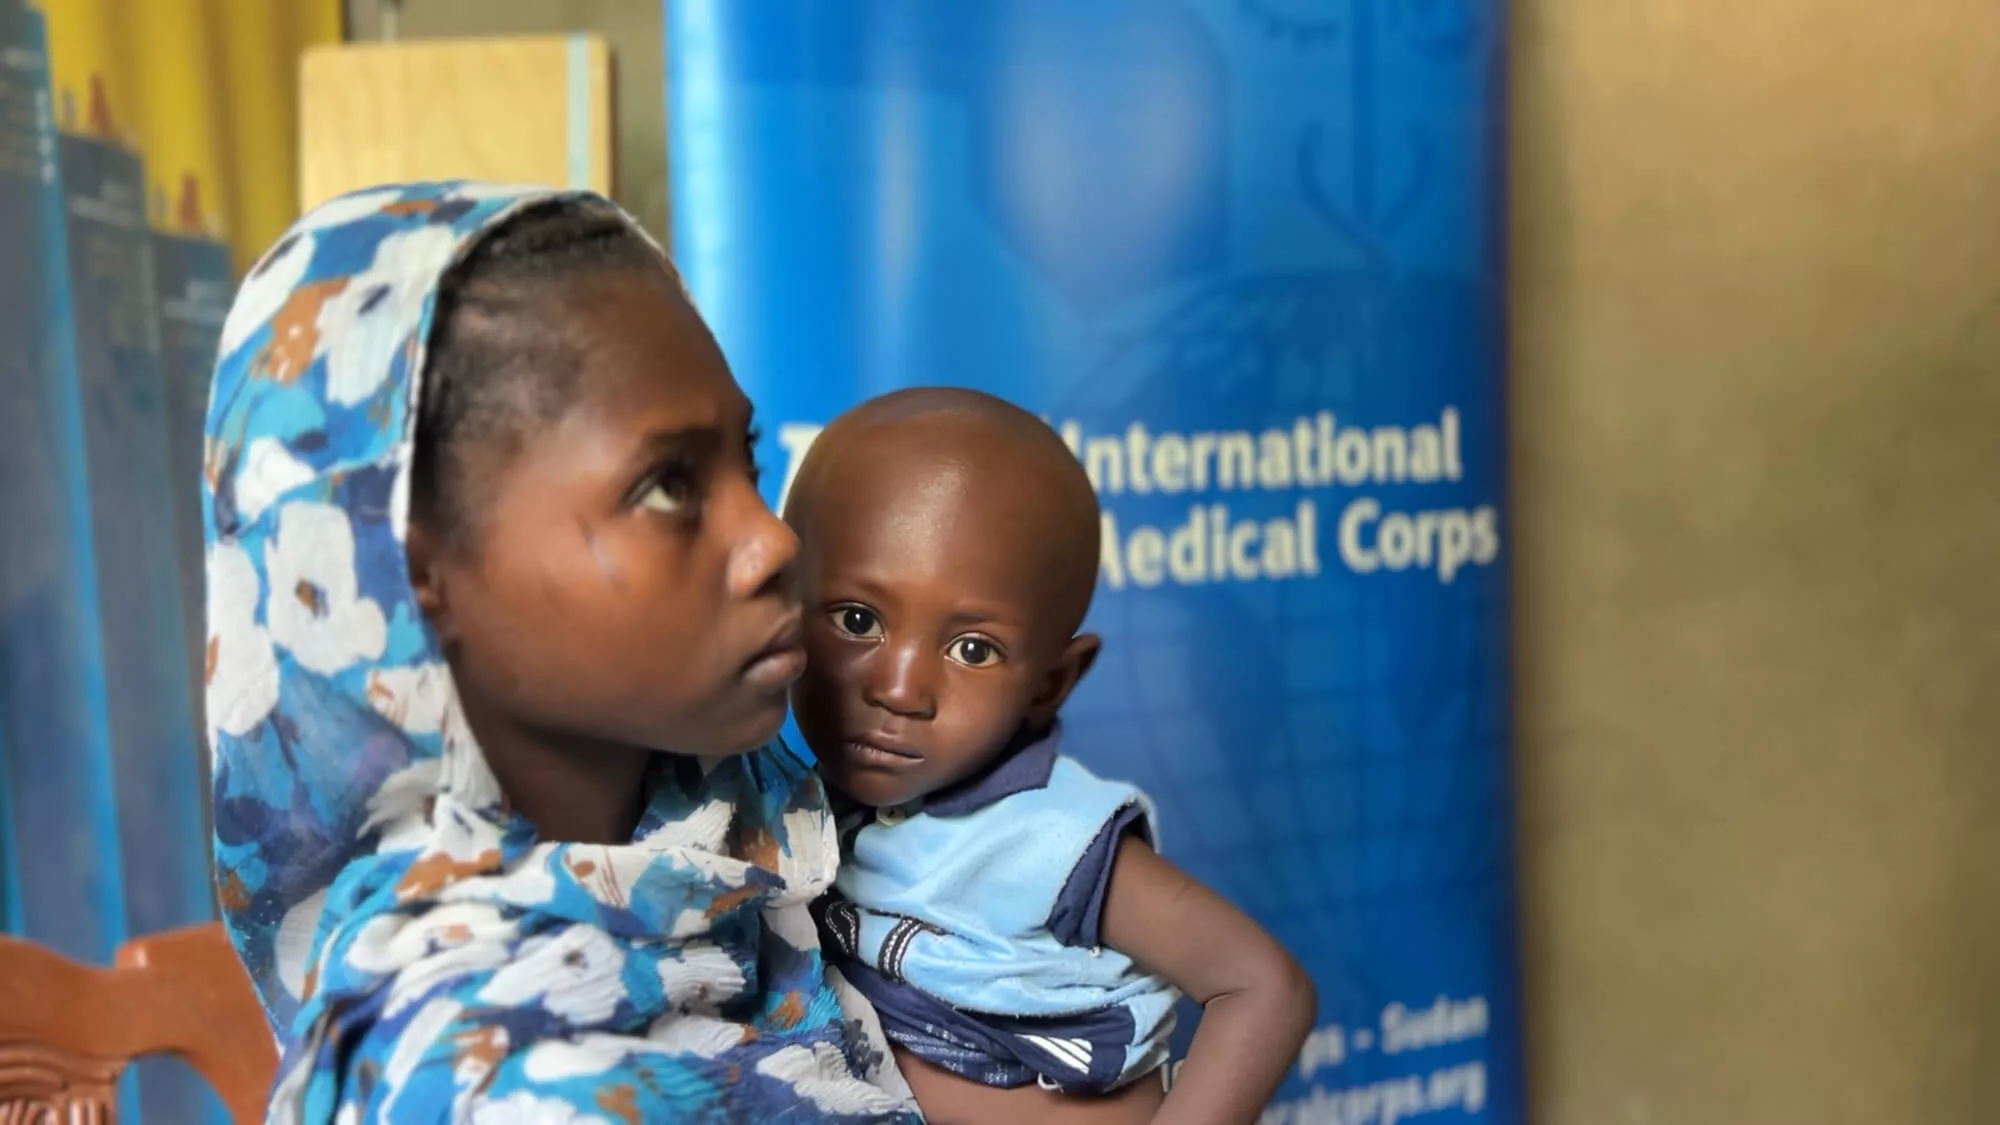 Radia Osman, 13, holds her brother, Musab, waiting for Namariq to take his MUAC measurement. Radia accompanied her mother and siblings to the clinic.